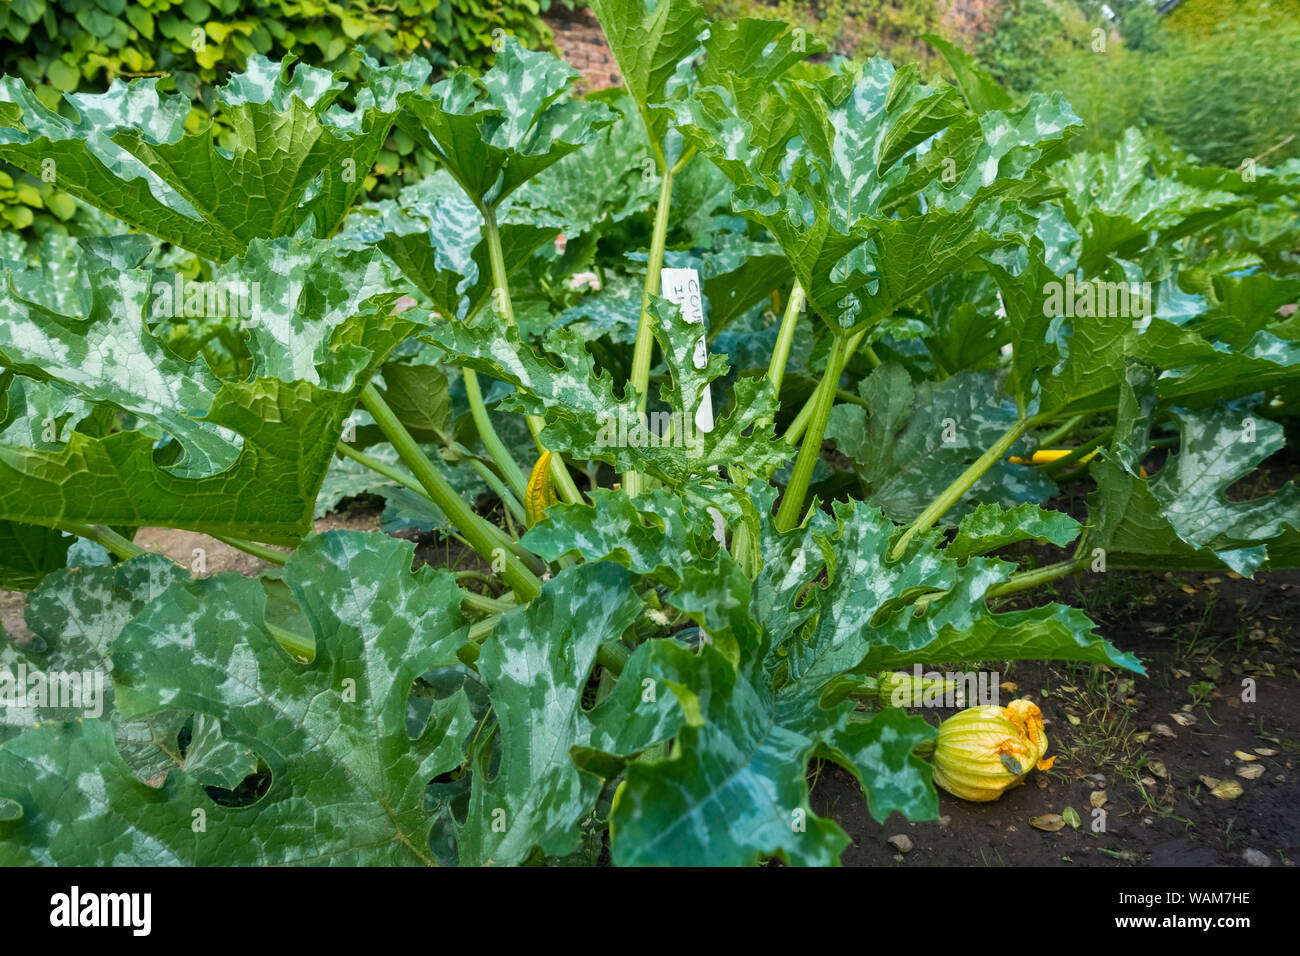 Close up of Courgettes Italian Striped courgette plants growing on an allotment garden plot in summer England UK United Kingdom GB Great Britain Stock Photo